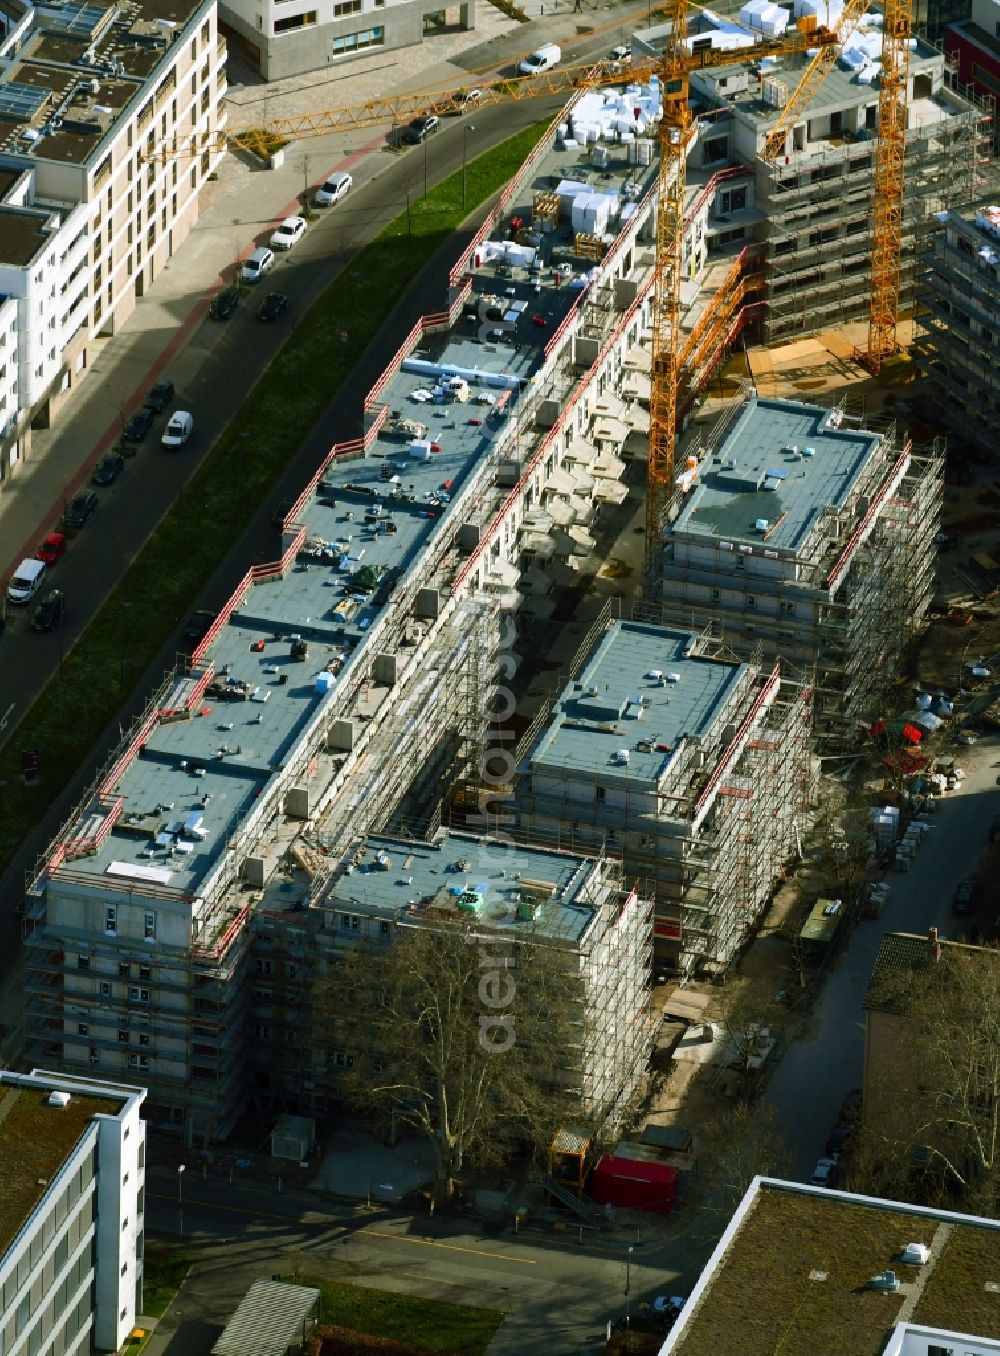 Ludwigshafen am Rhein from above - Construction site for City Quarters Building of the building project of LUV Ludwigshafen on Gneisenaustrasse - Rheinallee in Ludwigshafen am Rhein in the state Rhineland-Palatinate, Germany